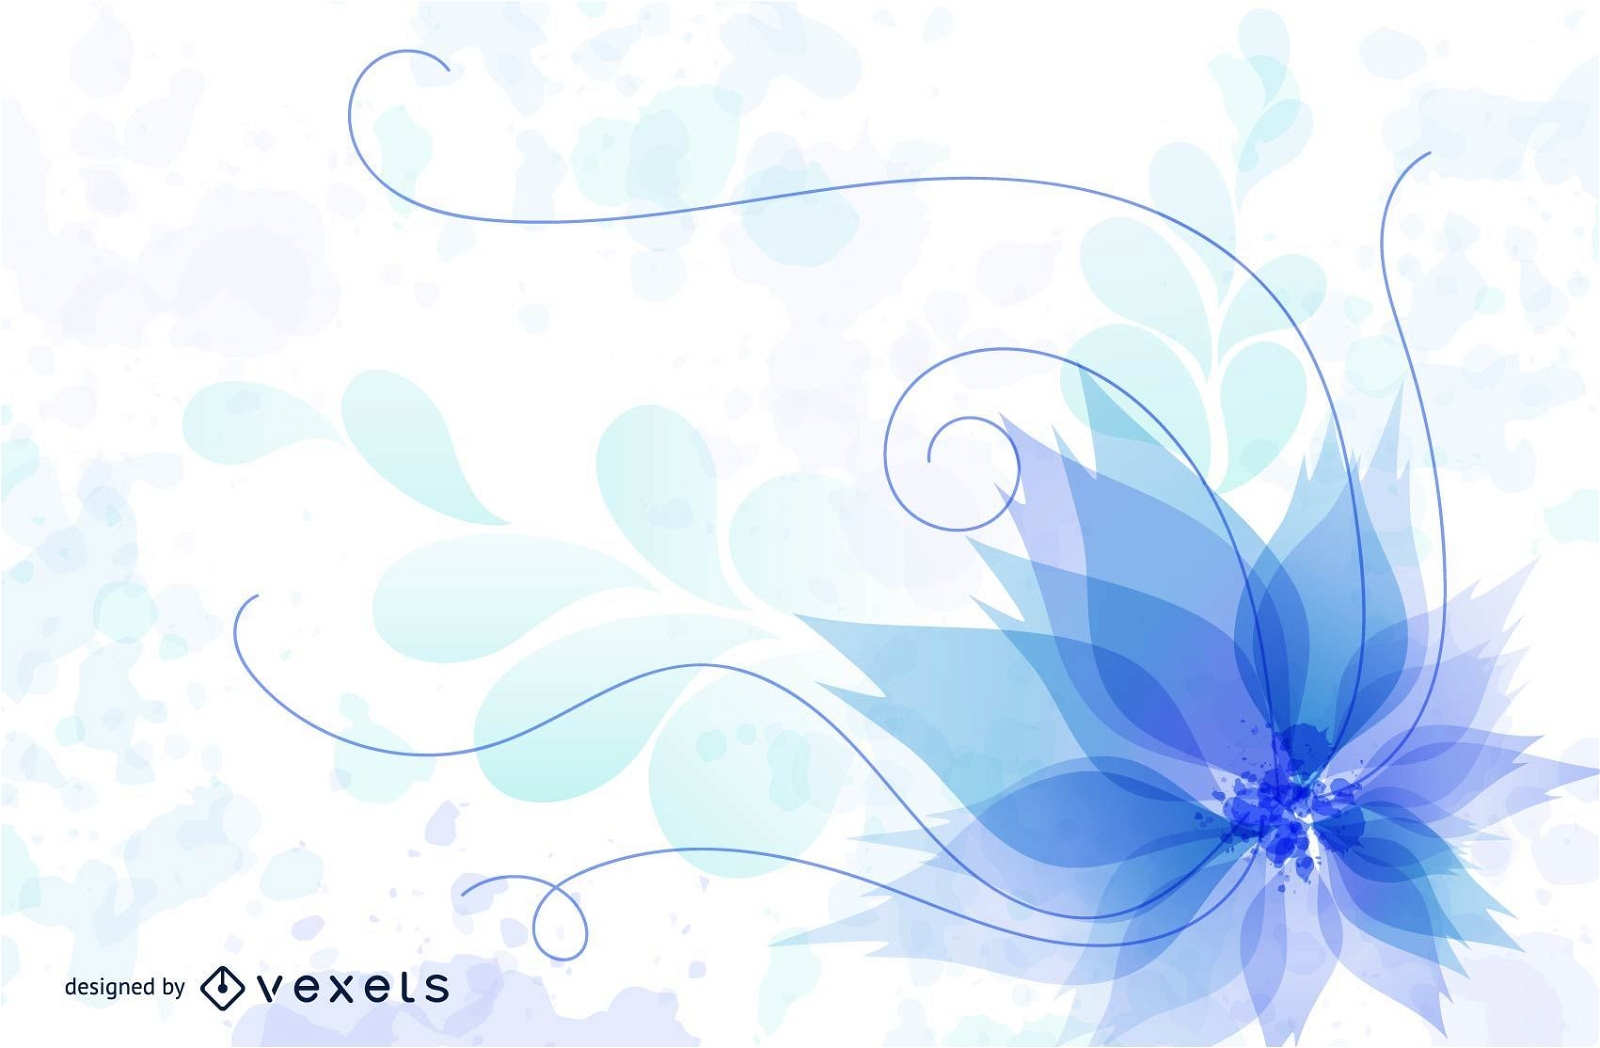 Fluorescent Blue Swirls and Floral Leaves